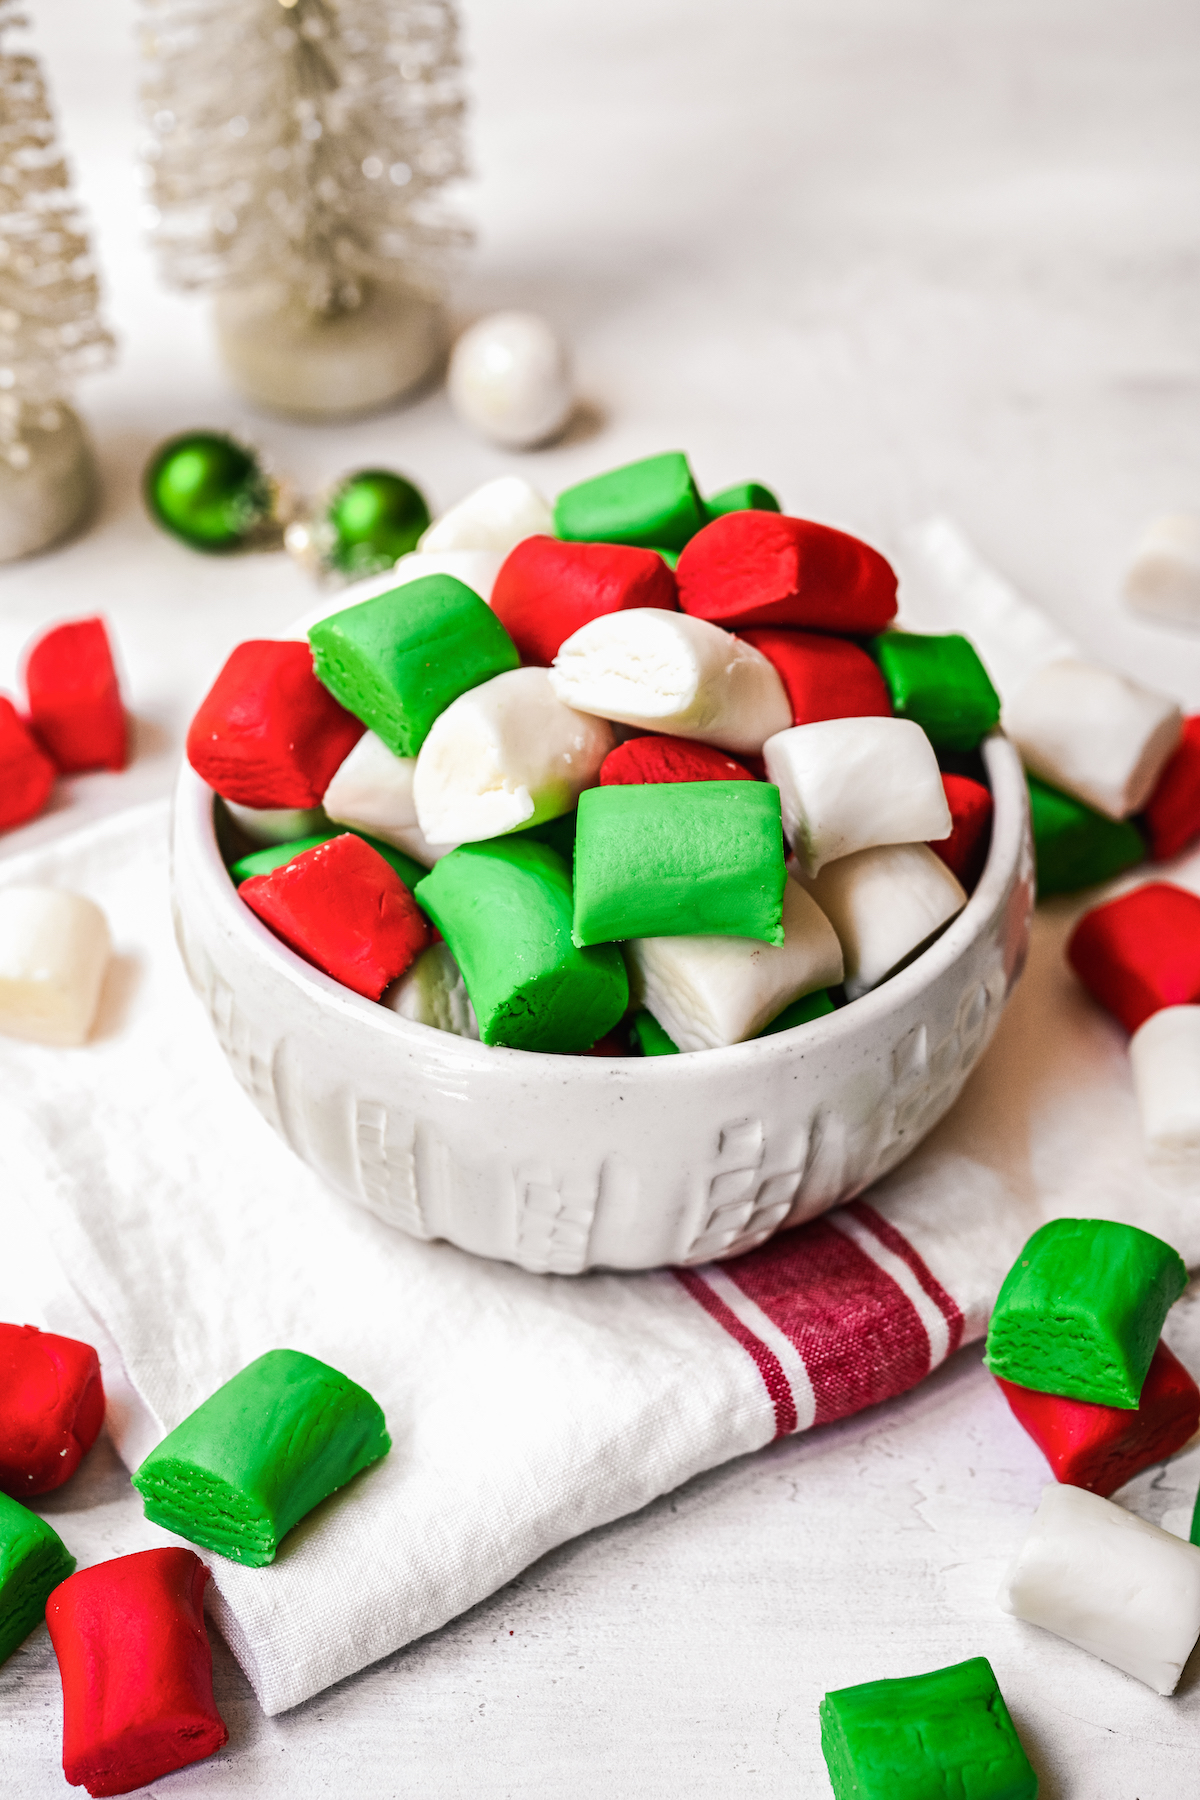 Red, white, and green mints in a small candy dish. More mints are scattered on the table.